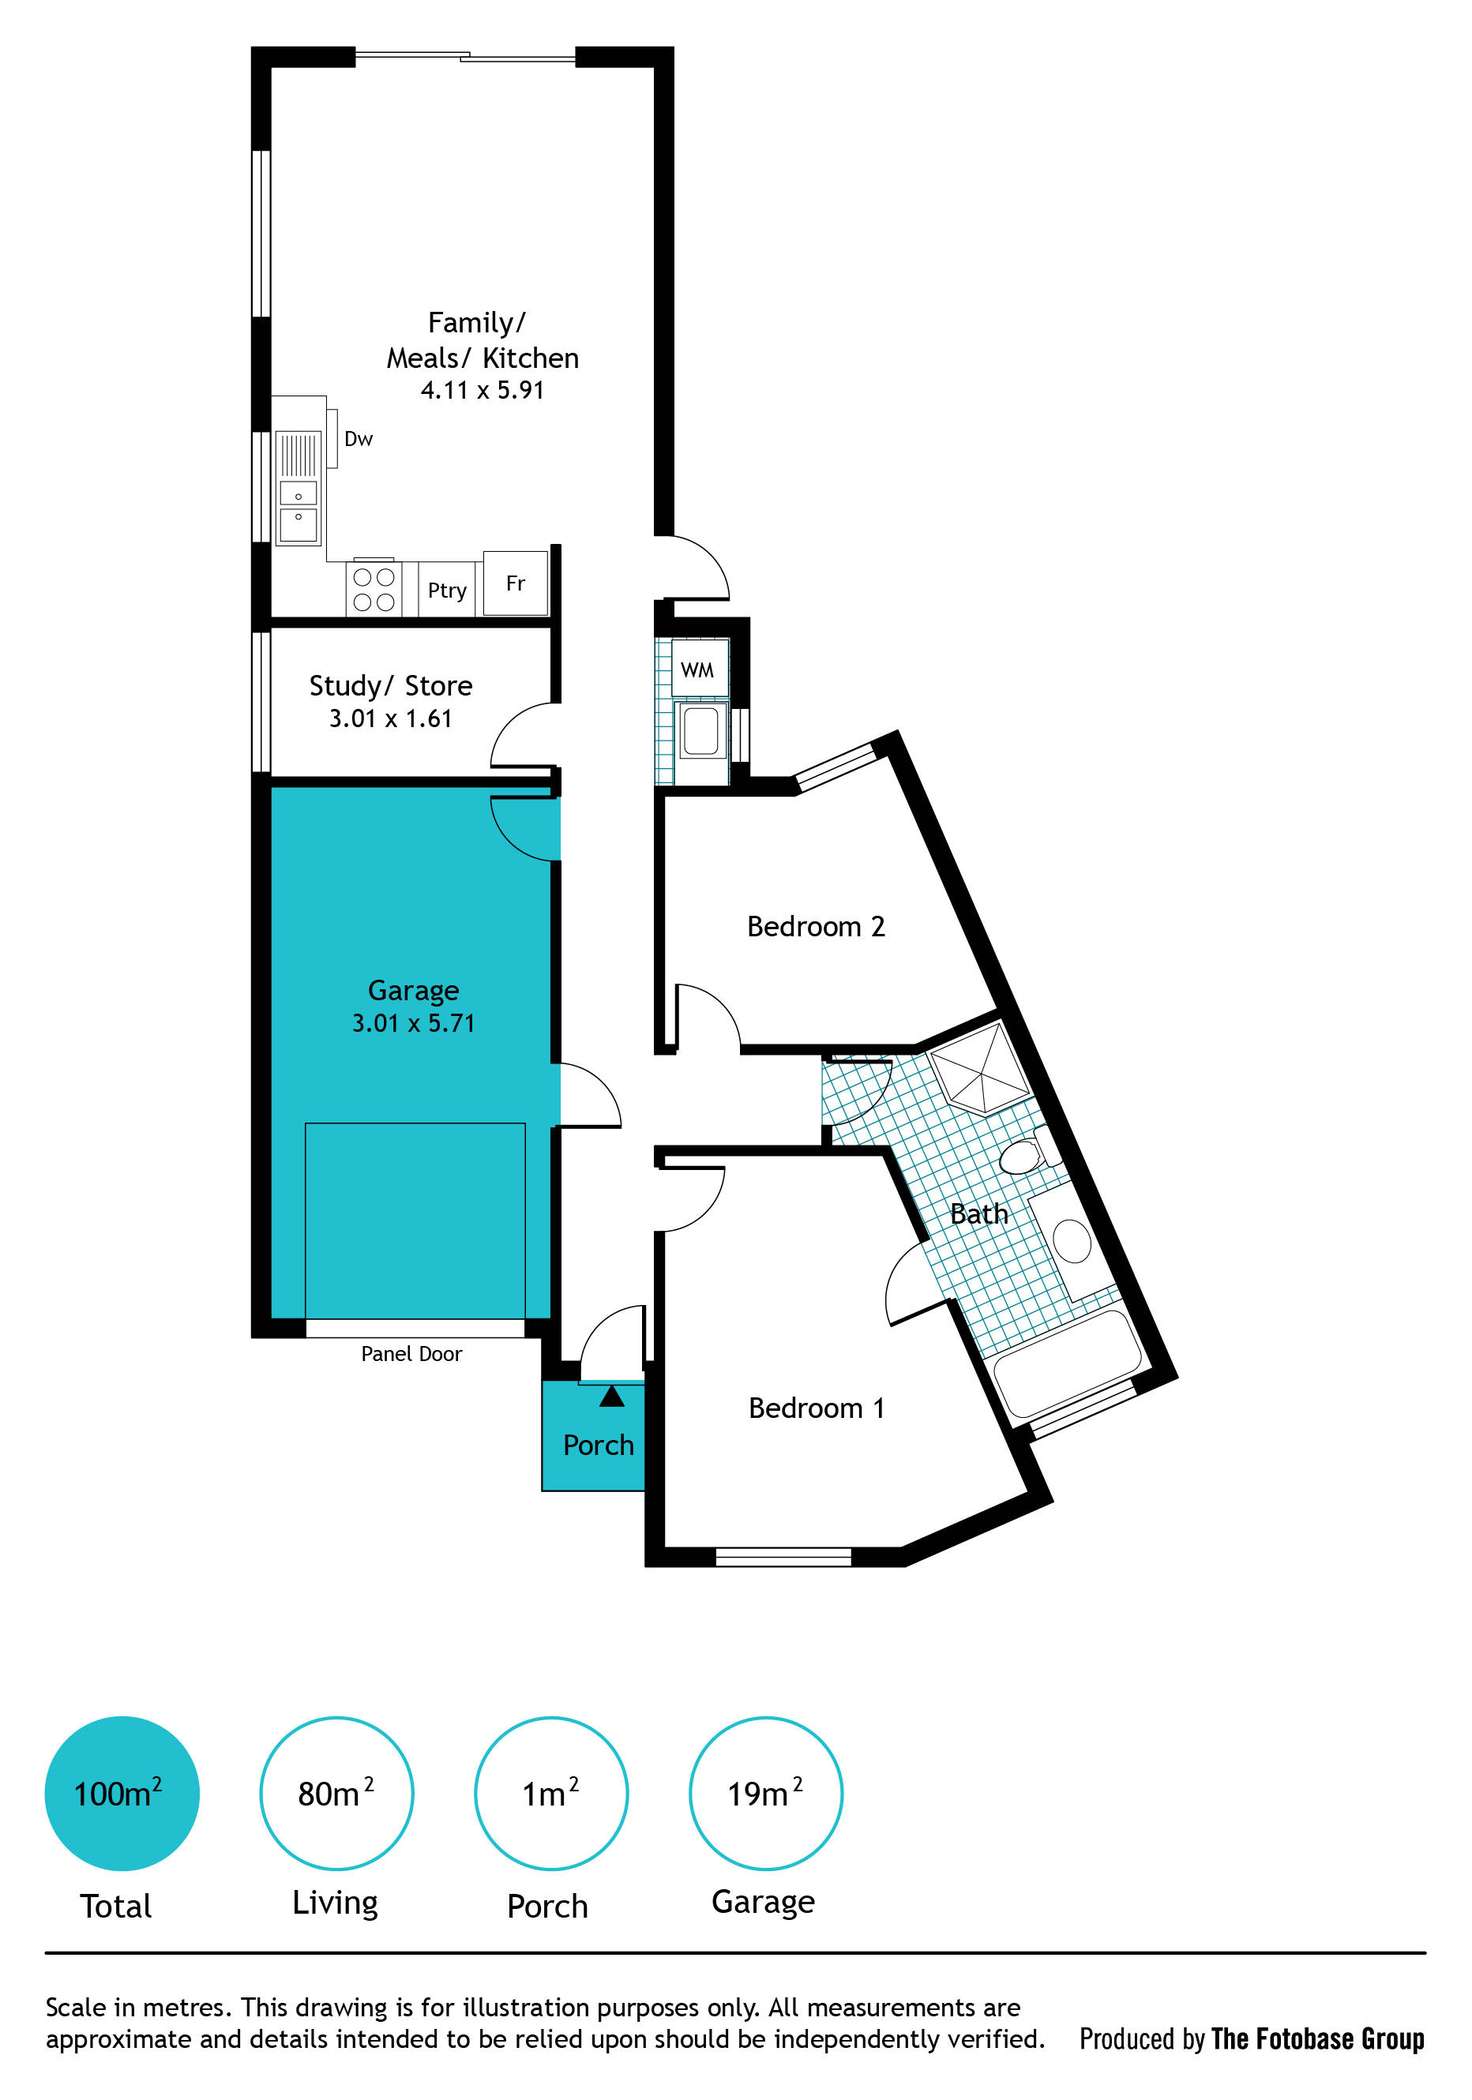 Floorplan of Homely house listing, 1/12 Hyde Place, Christies Beach SA 5165